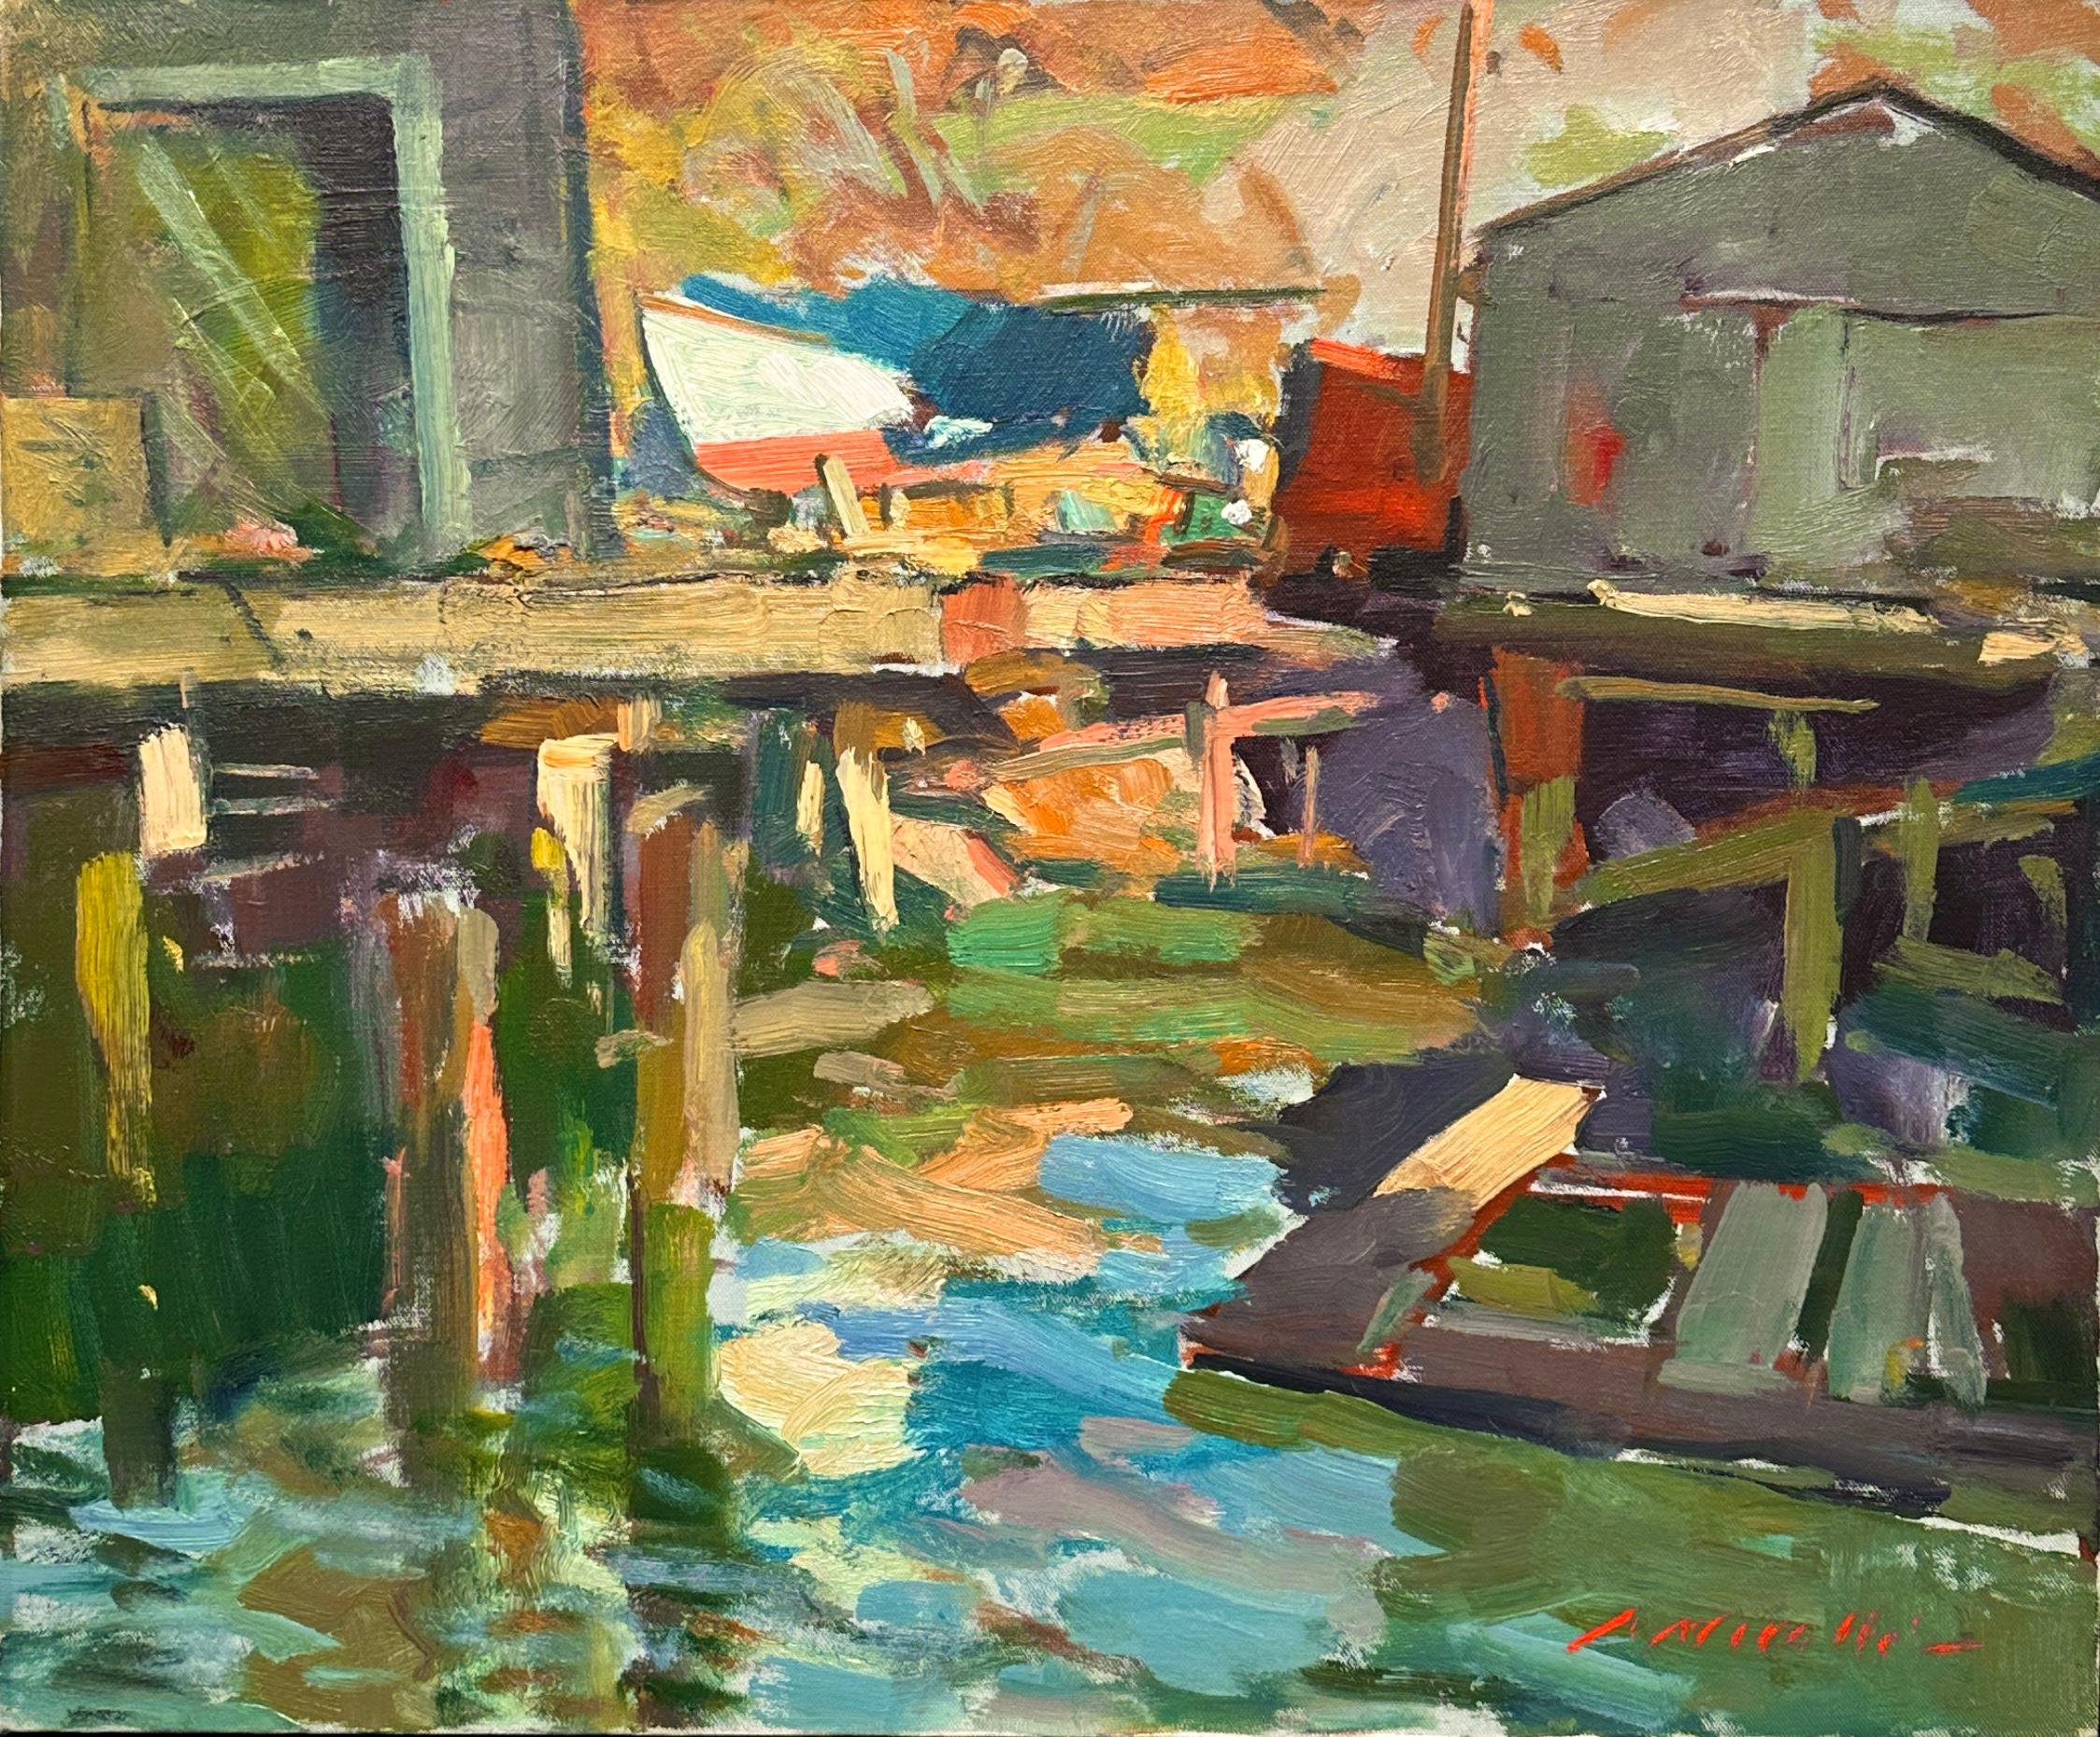 Gloucester Artist Charles Movalli "Low Tide" 